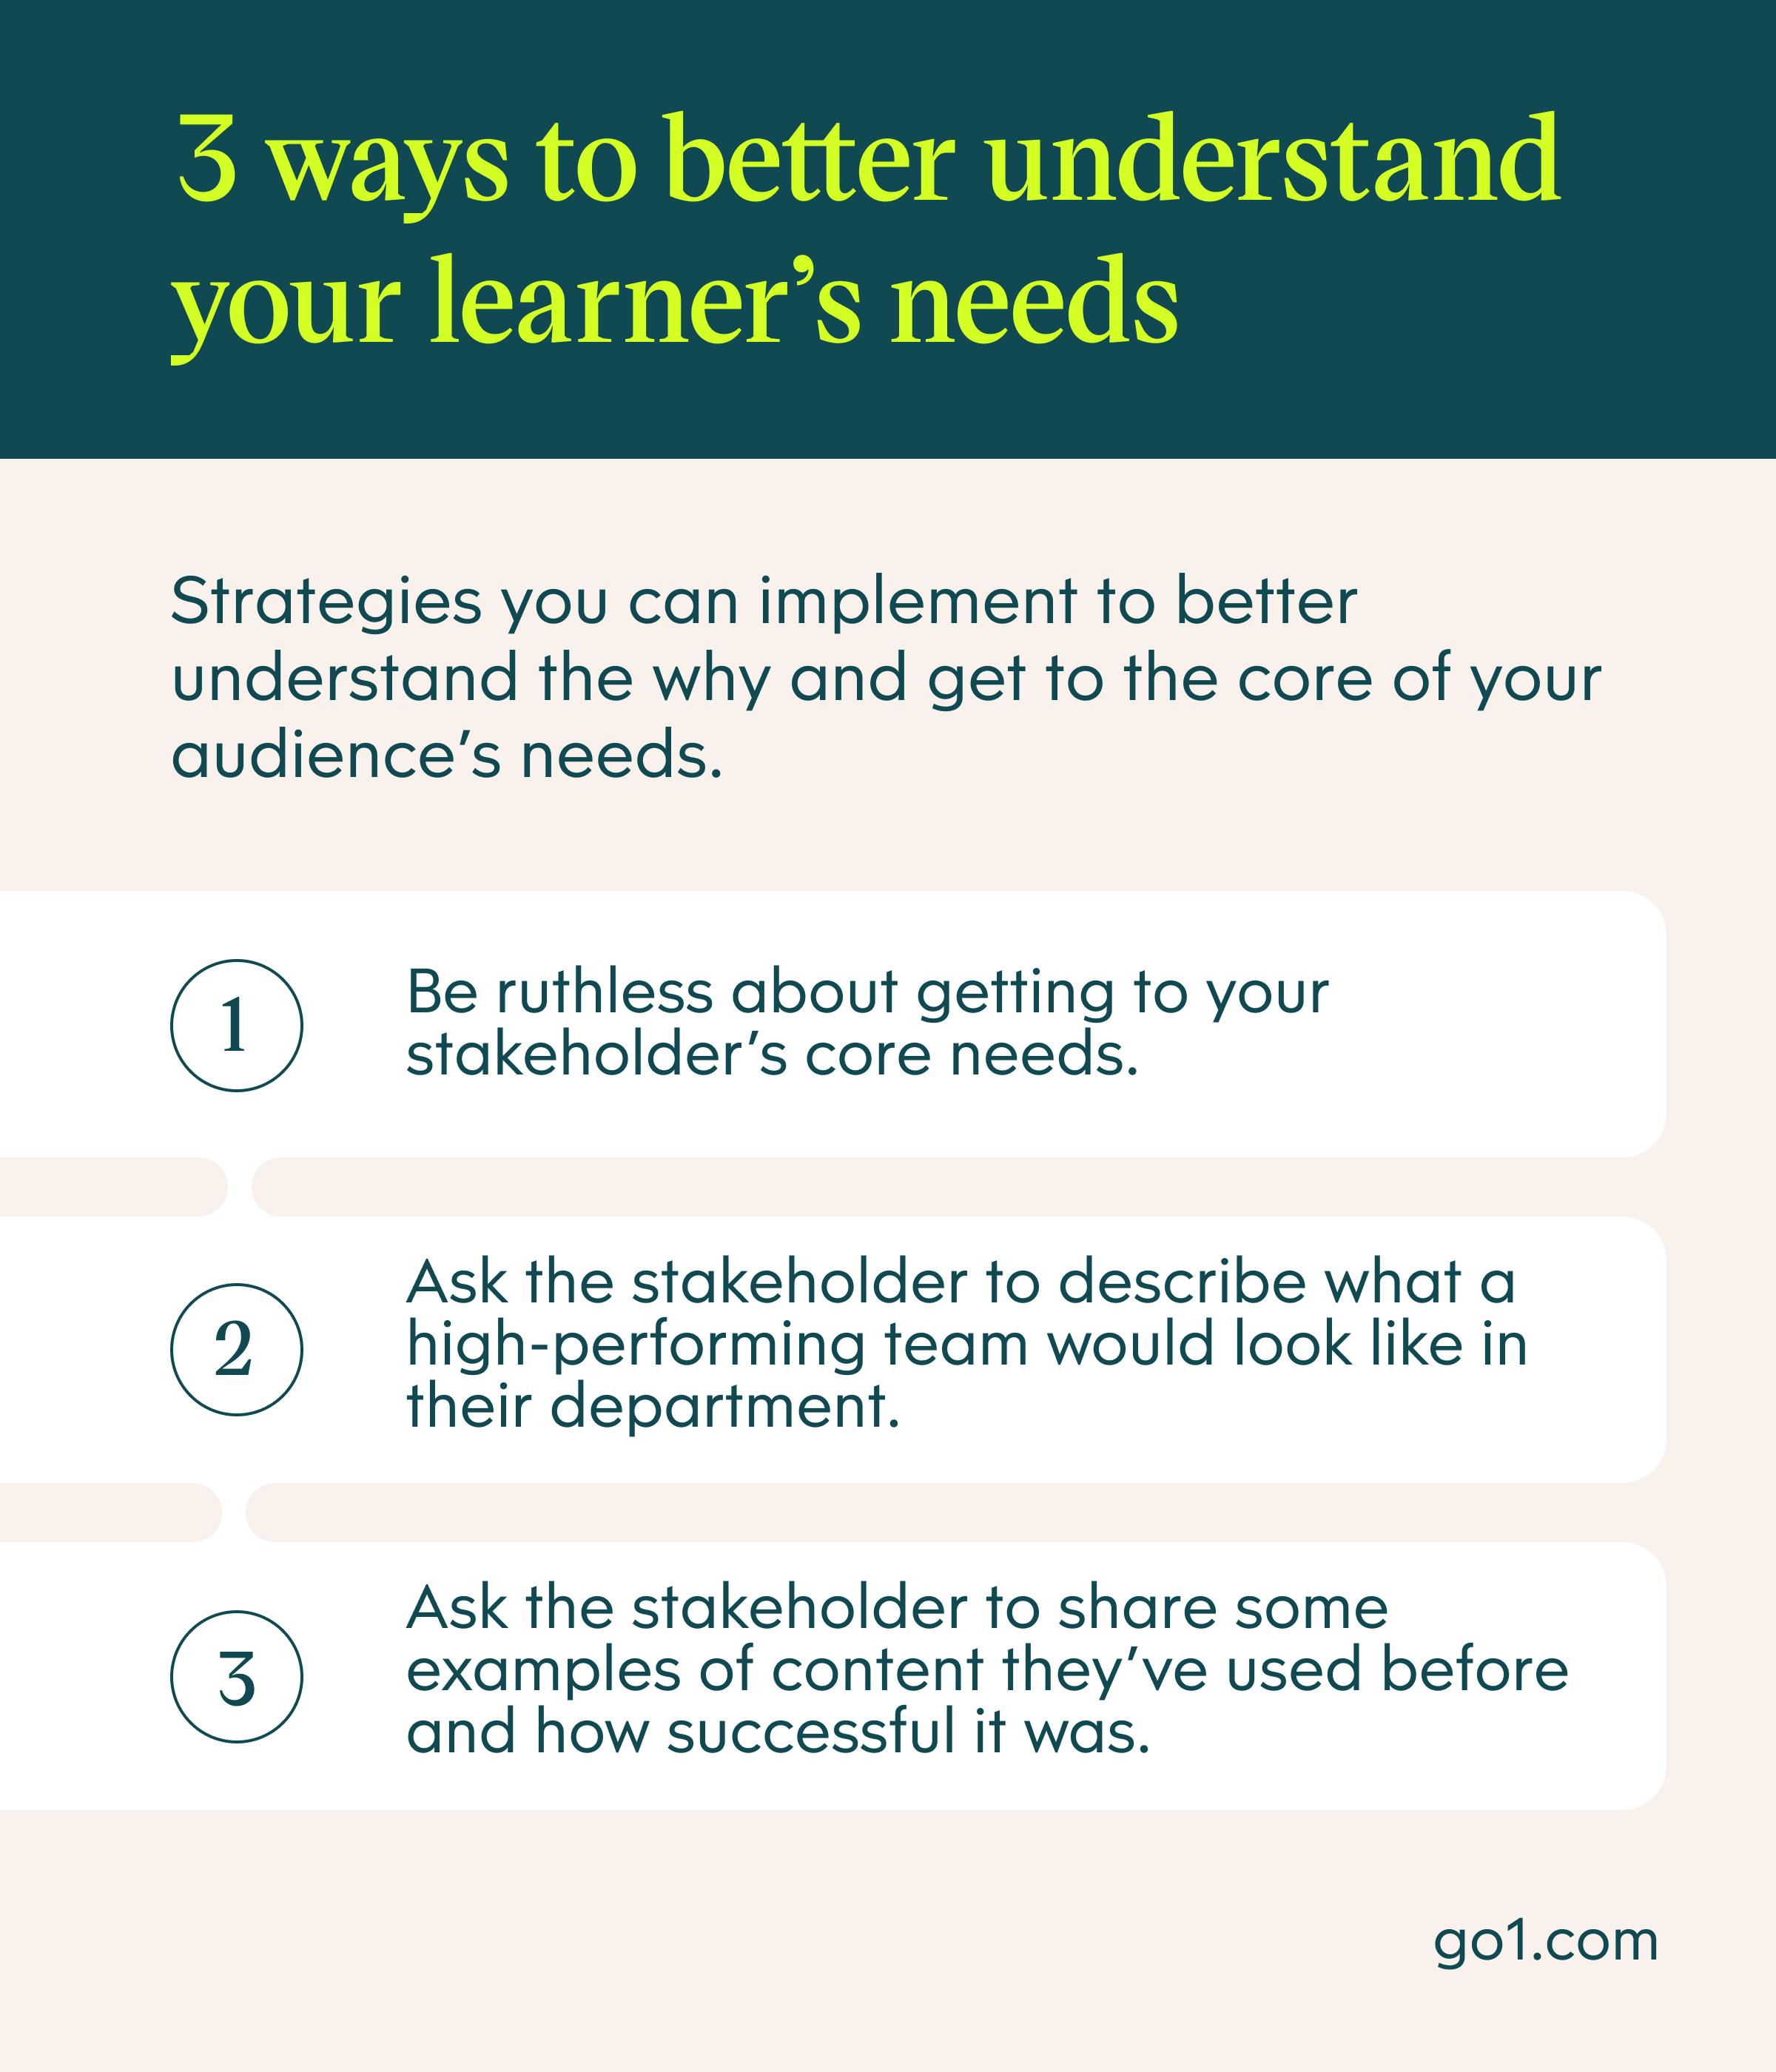 Infographic of 3 ways to better understand your learner's needs